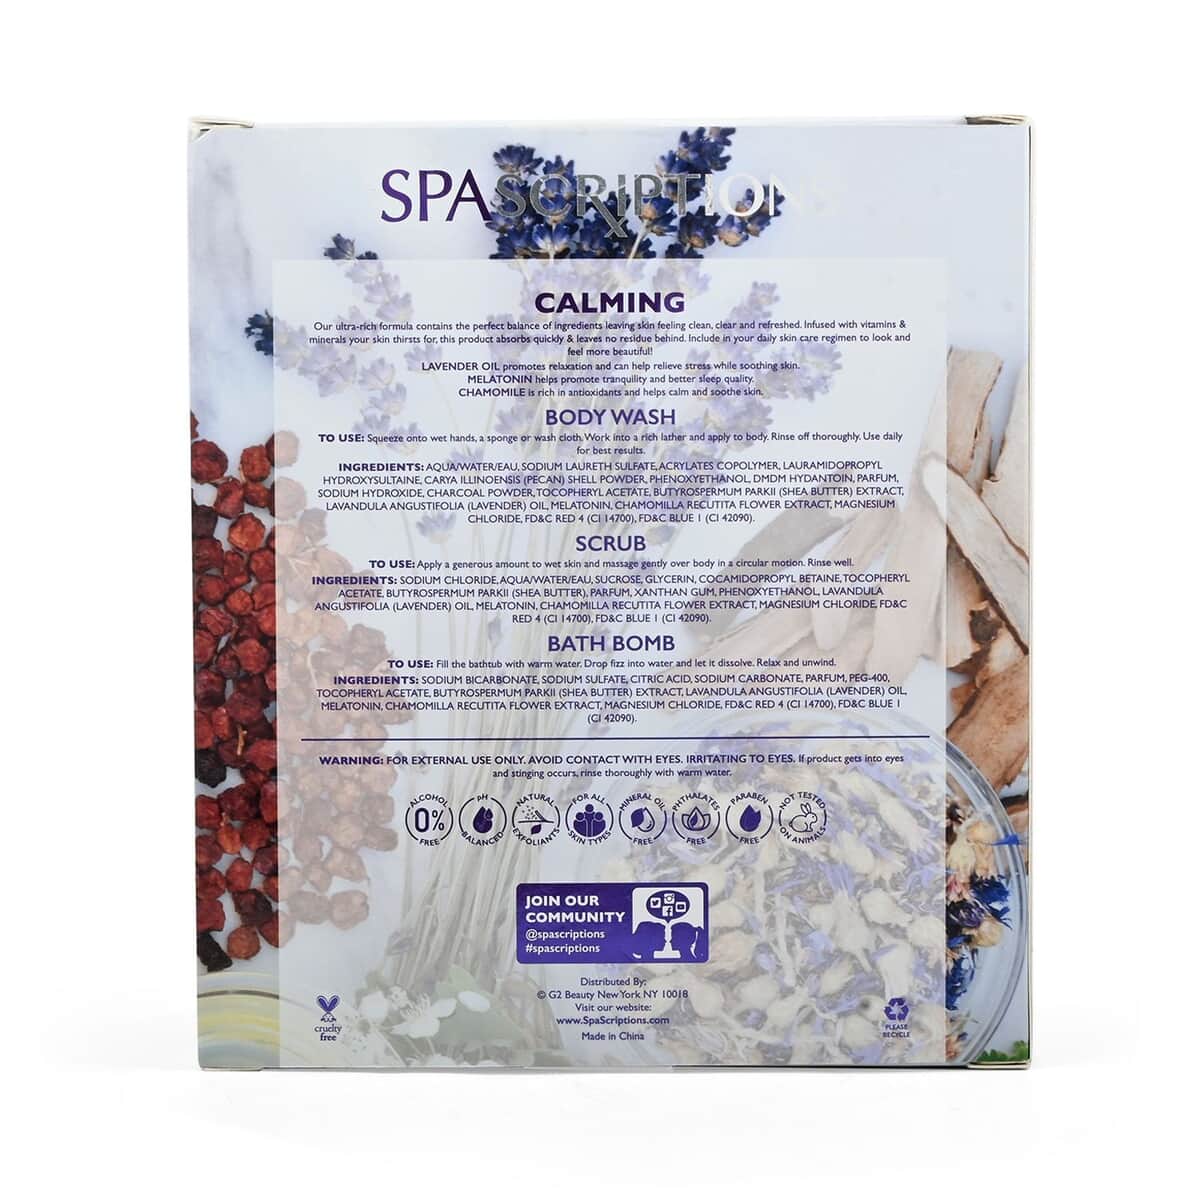 Spascriptions Spathecary Bath Time Essentials Kit - Calming image number 2